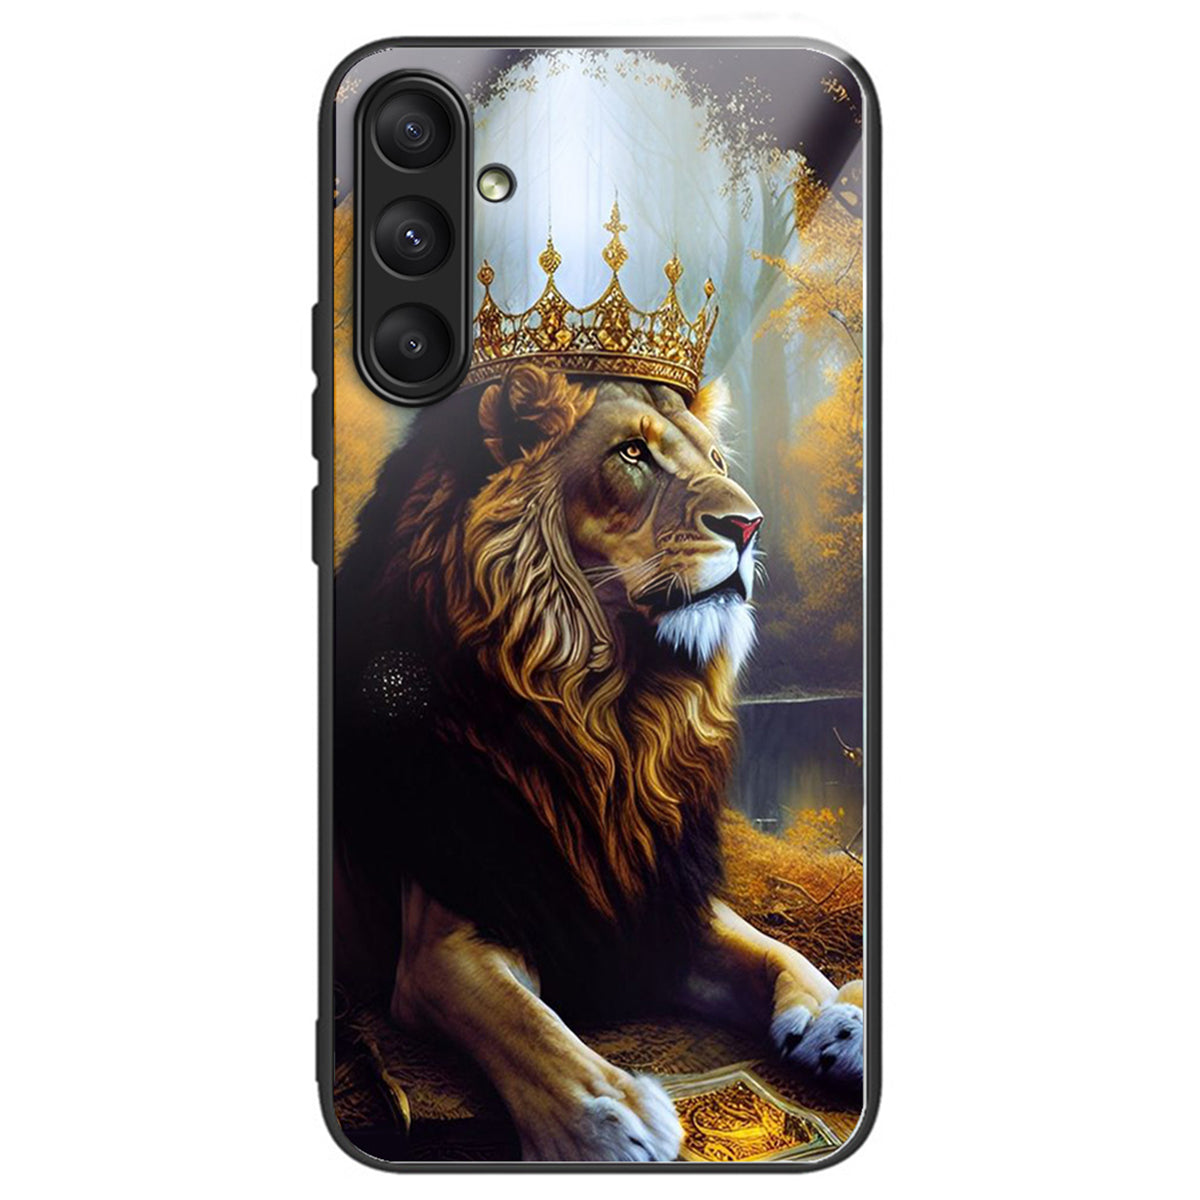 For Samsung Galaxy A24 4G (162.1 x 77.6 x 8.3mm) Case Tempered Glass Pattern Camera Lens Protection Phone Cover - Lion King